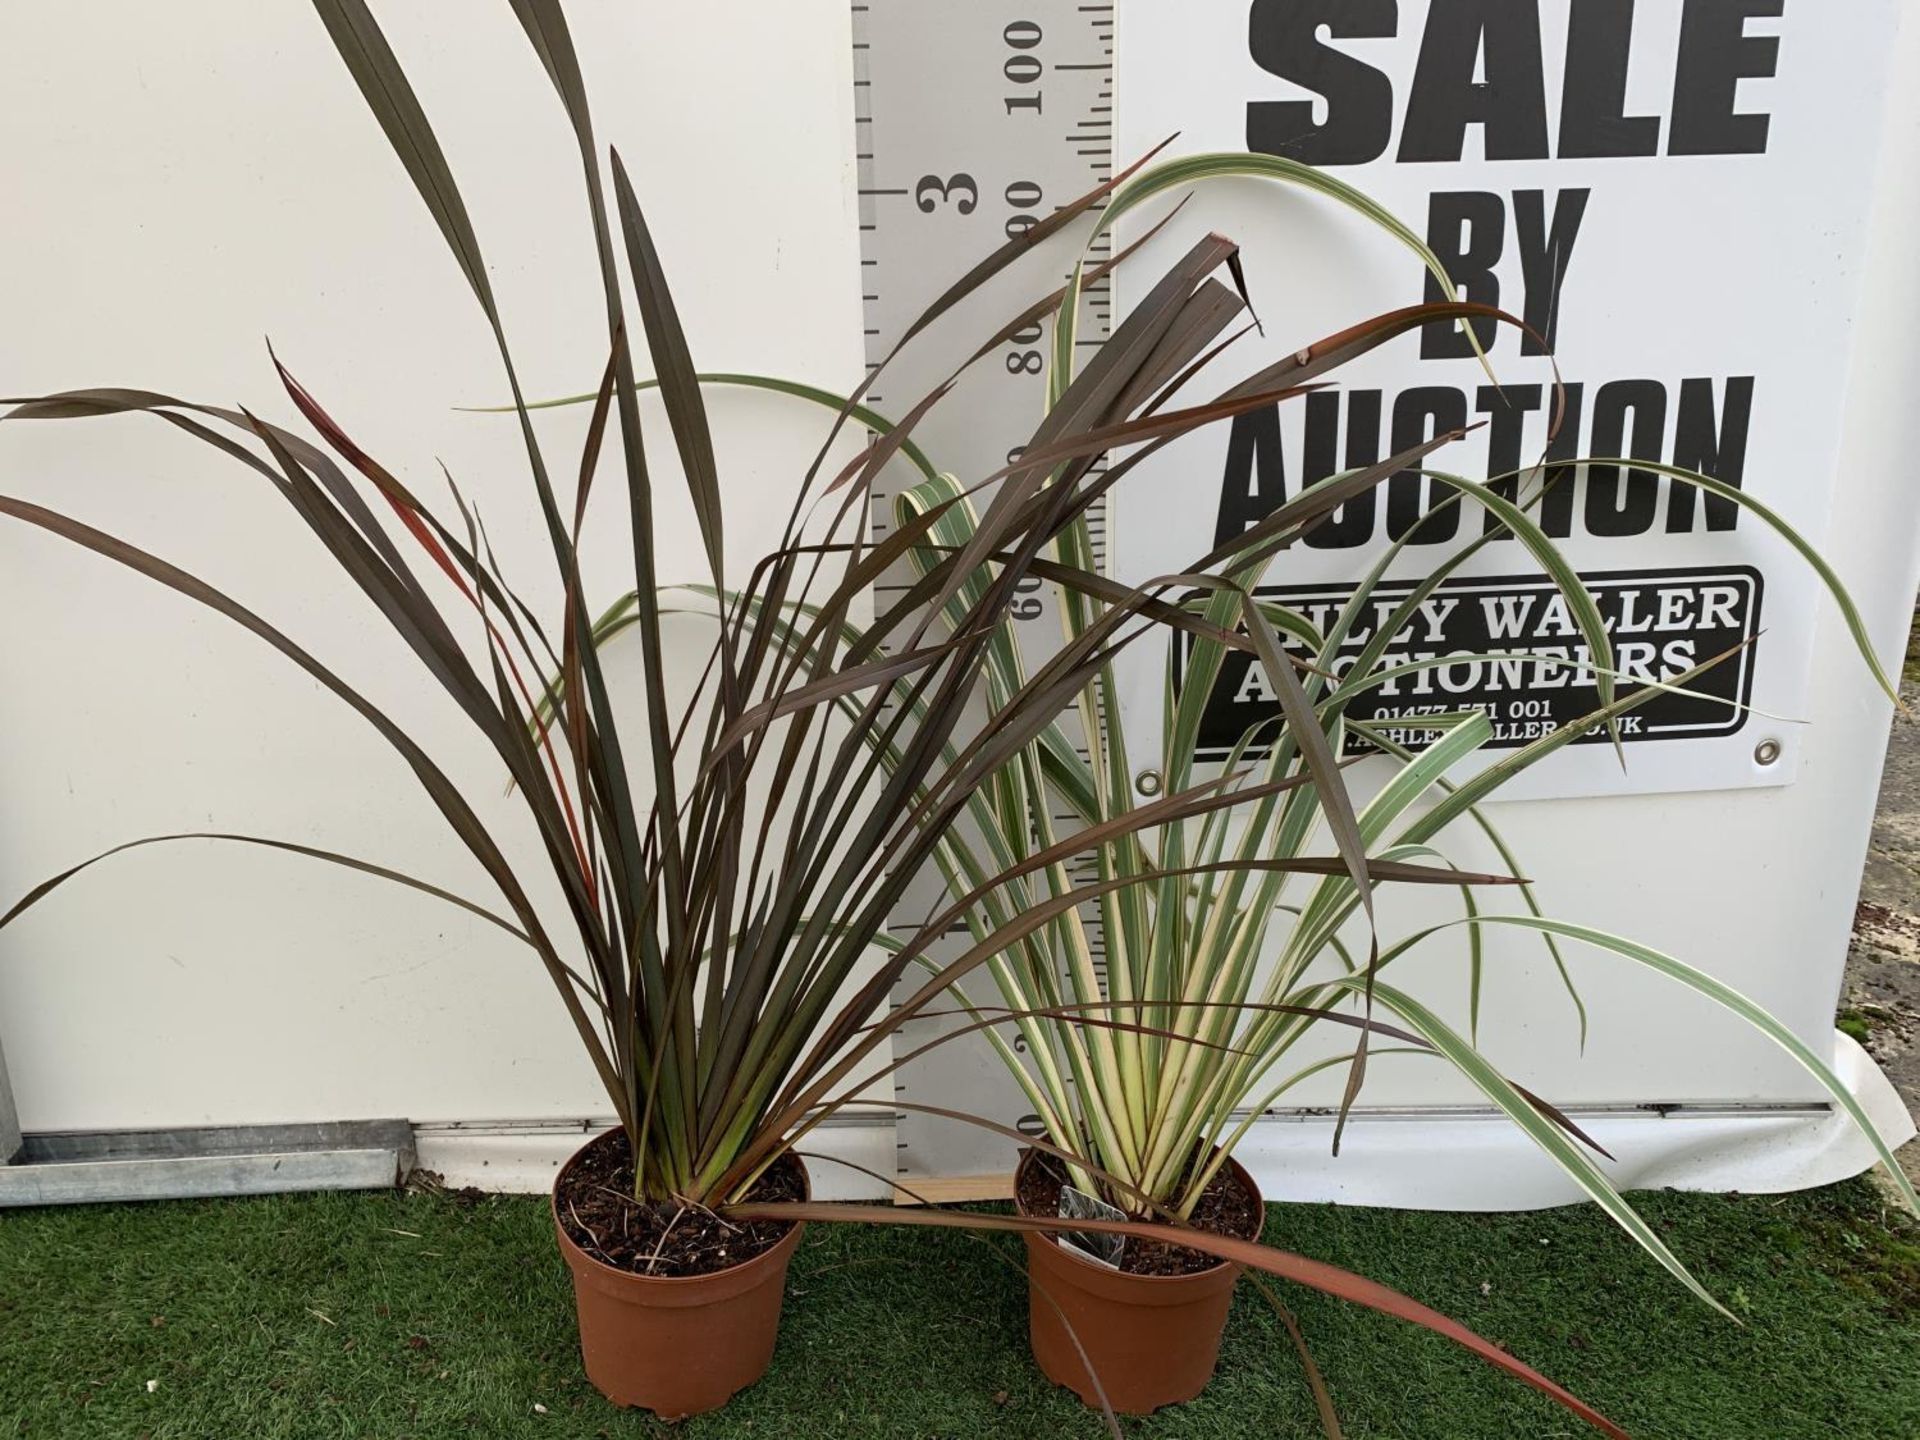 TWO PHORMIUM TENAX PLANTS 'CREAM DELIGHT' AND 'PLATTS BLACK' APPROX ONE METRE IN HEIGHT IN 3LTR POTS